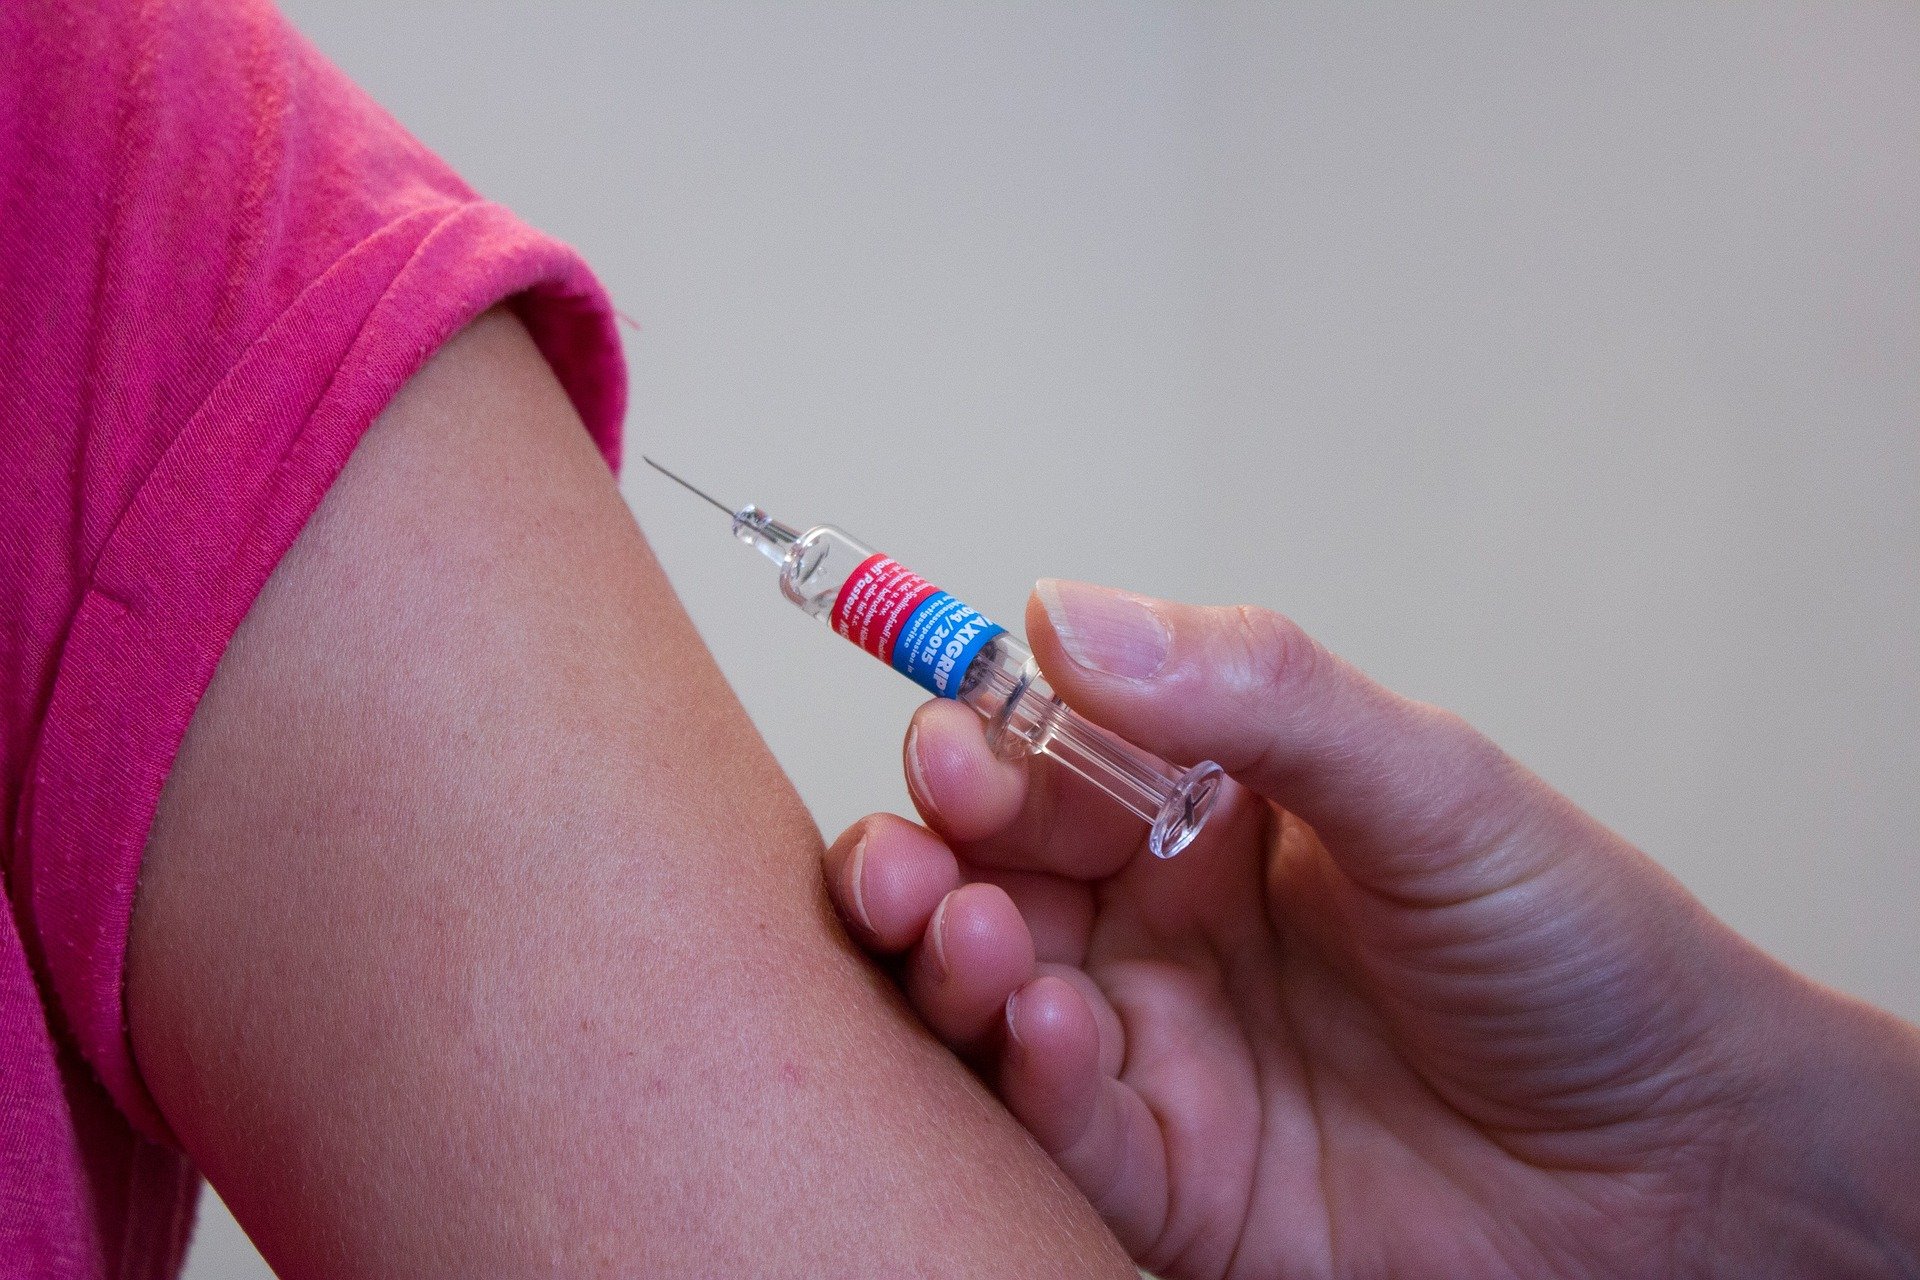 Does God want us to be vaccinated?